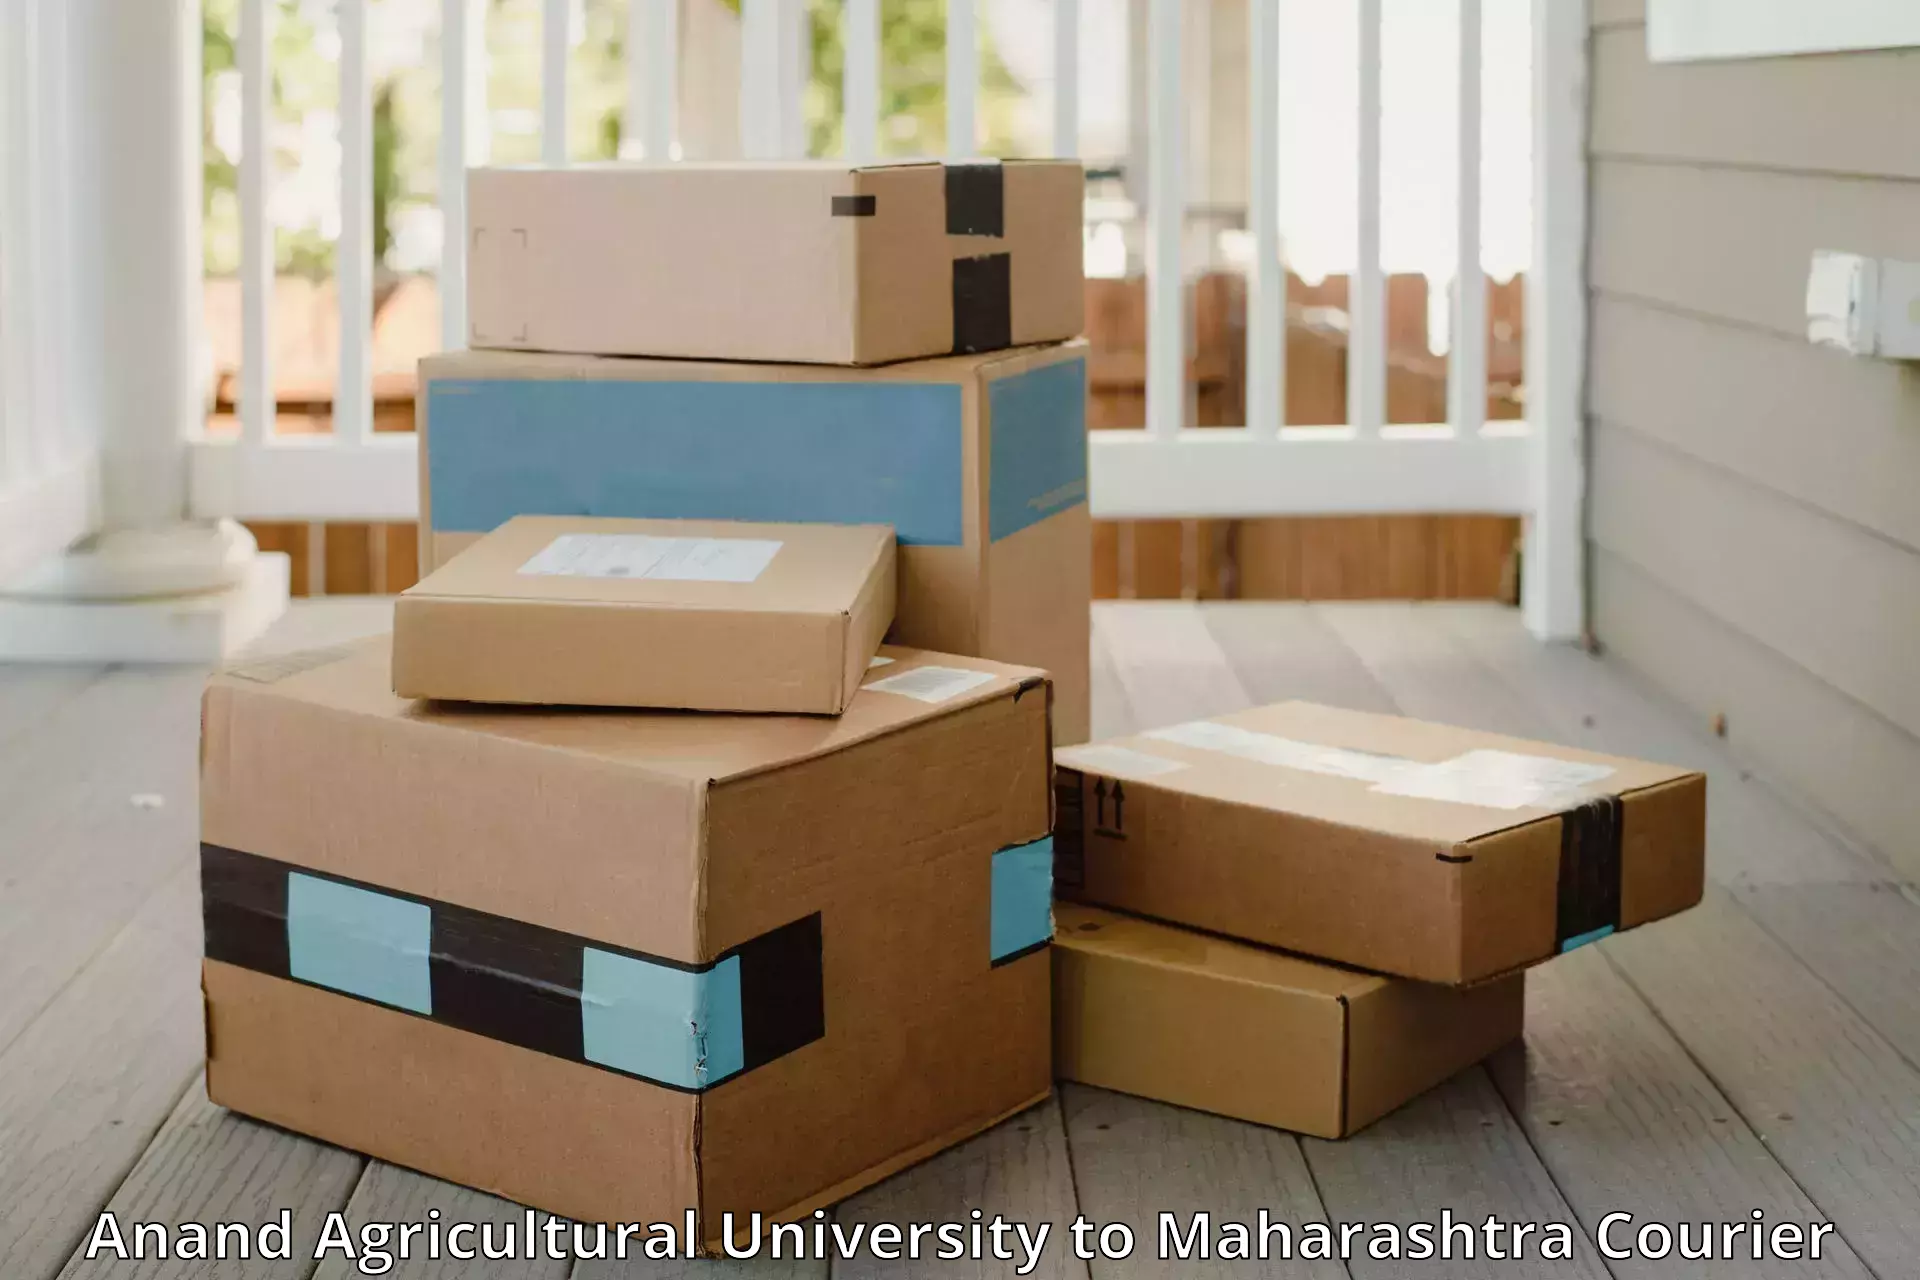 Luggage transport solutions Anand Agricultural University to Maharashtra